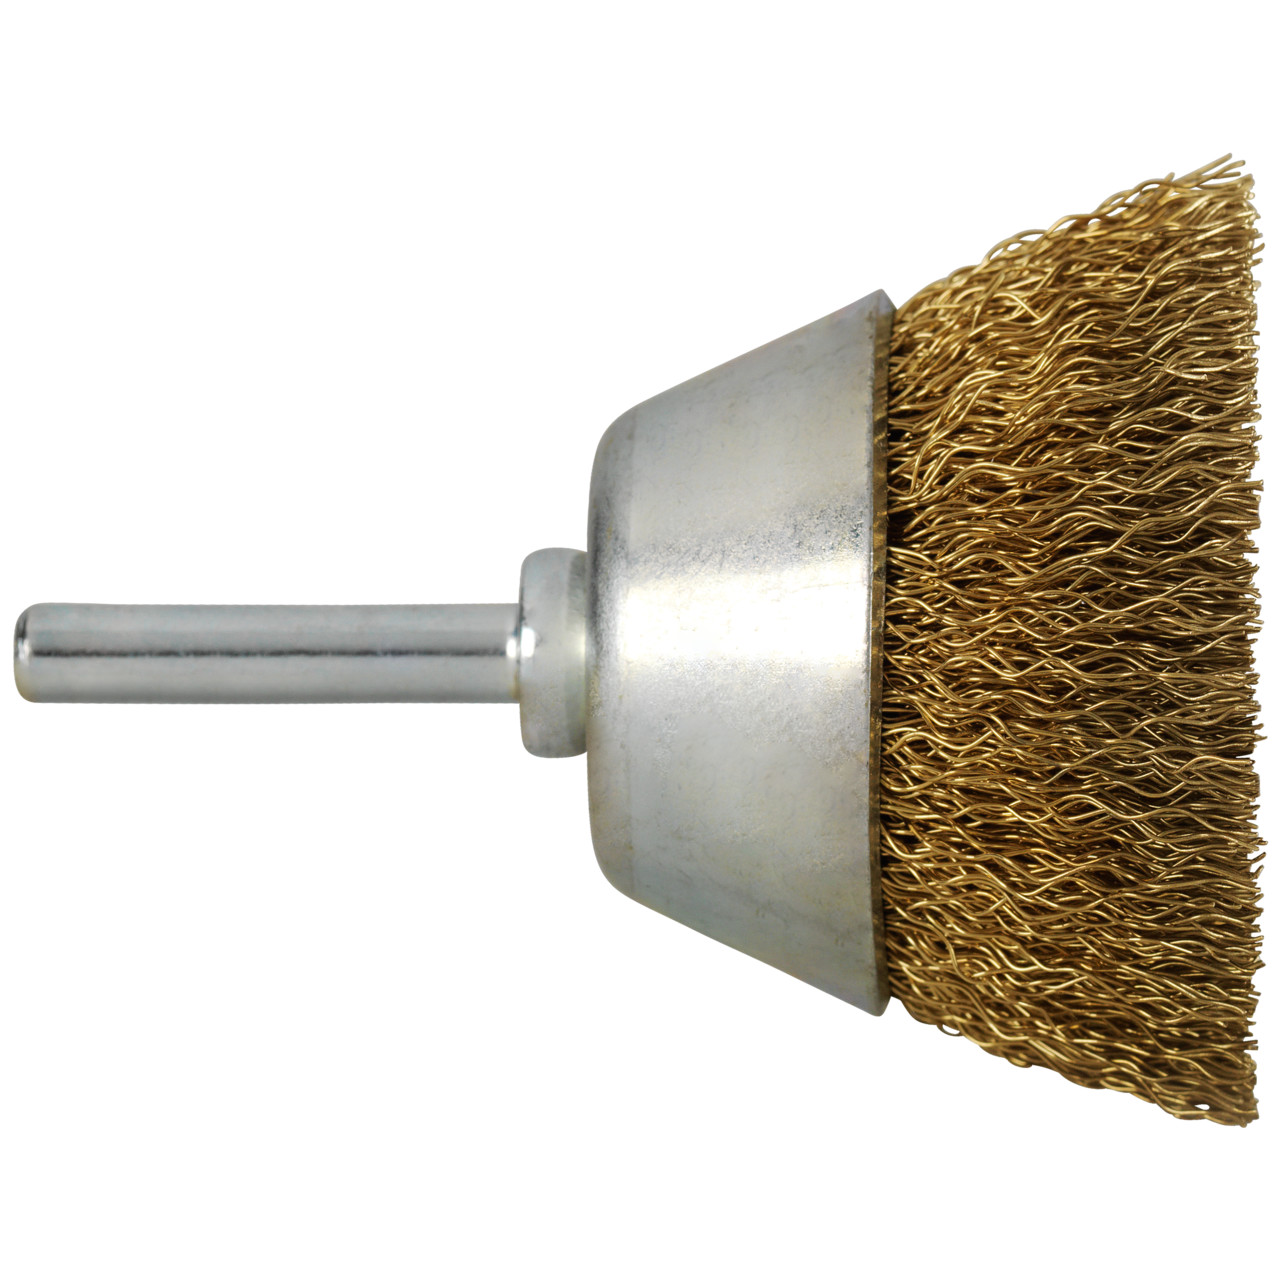 TYROLIT Cup brushes DxLxH-GExI 50x10x20-6x30 For non-ferrous metals, shape: 52TDW - (cup brushes), Art. 23470